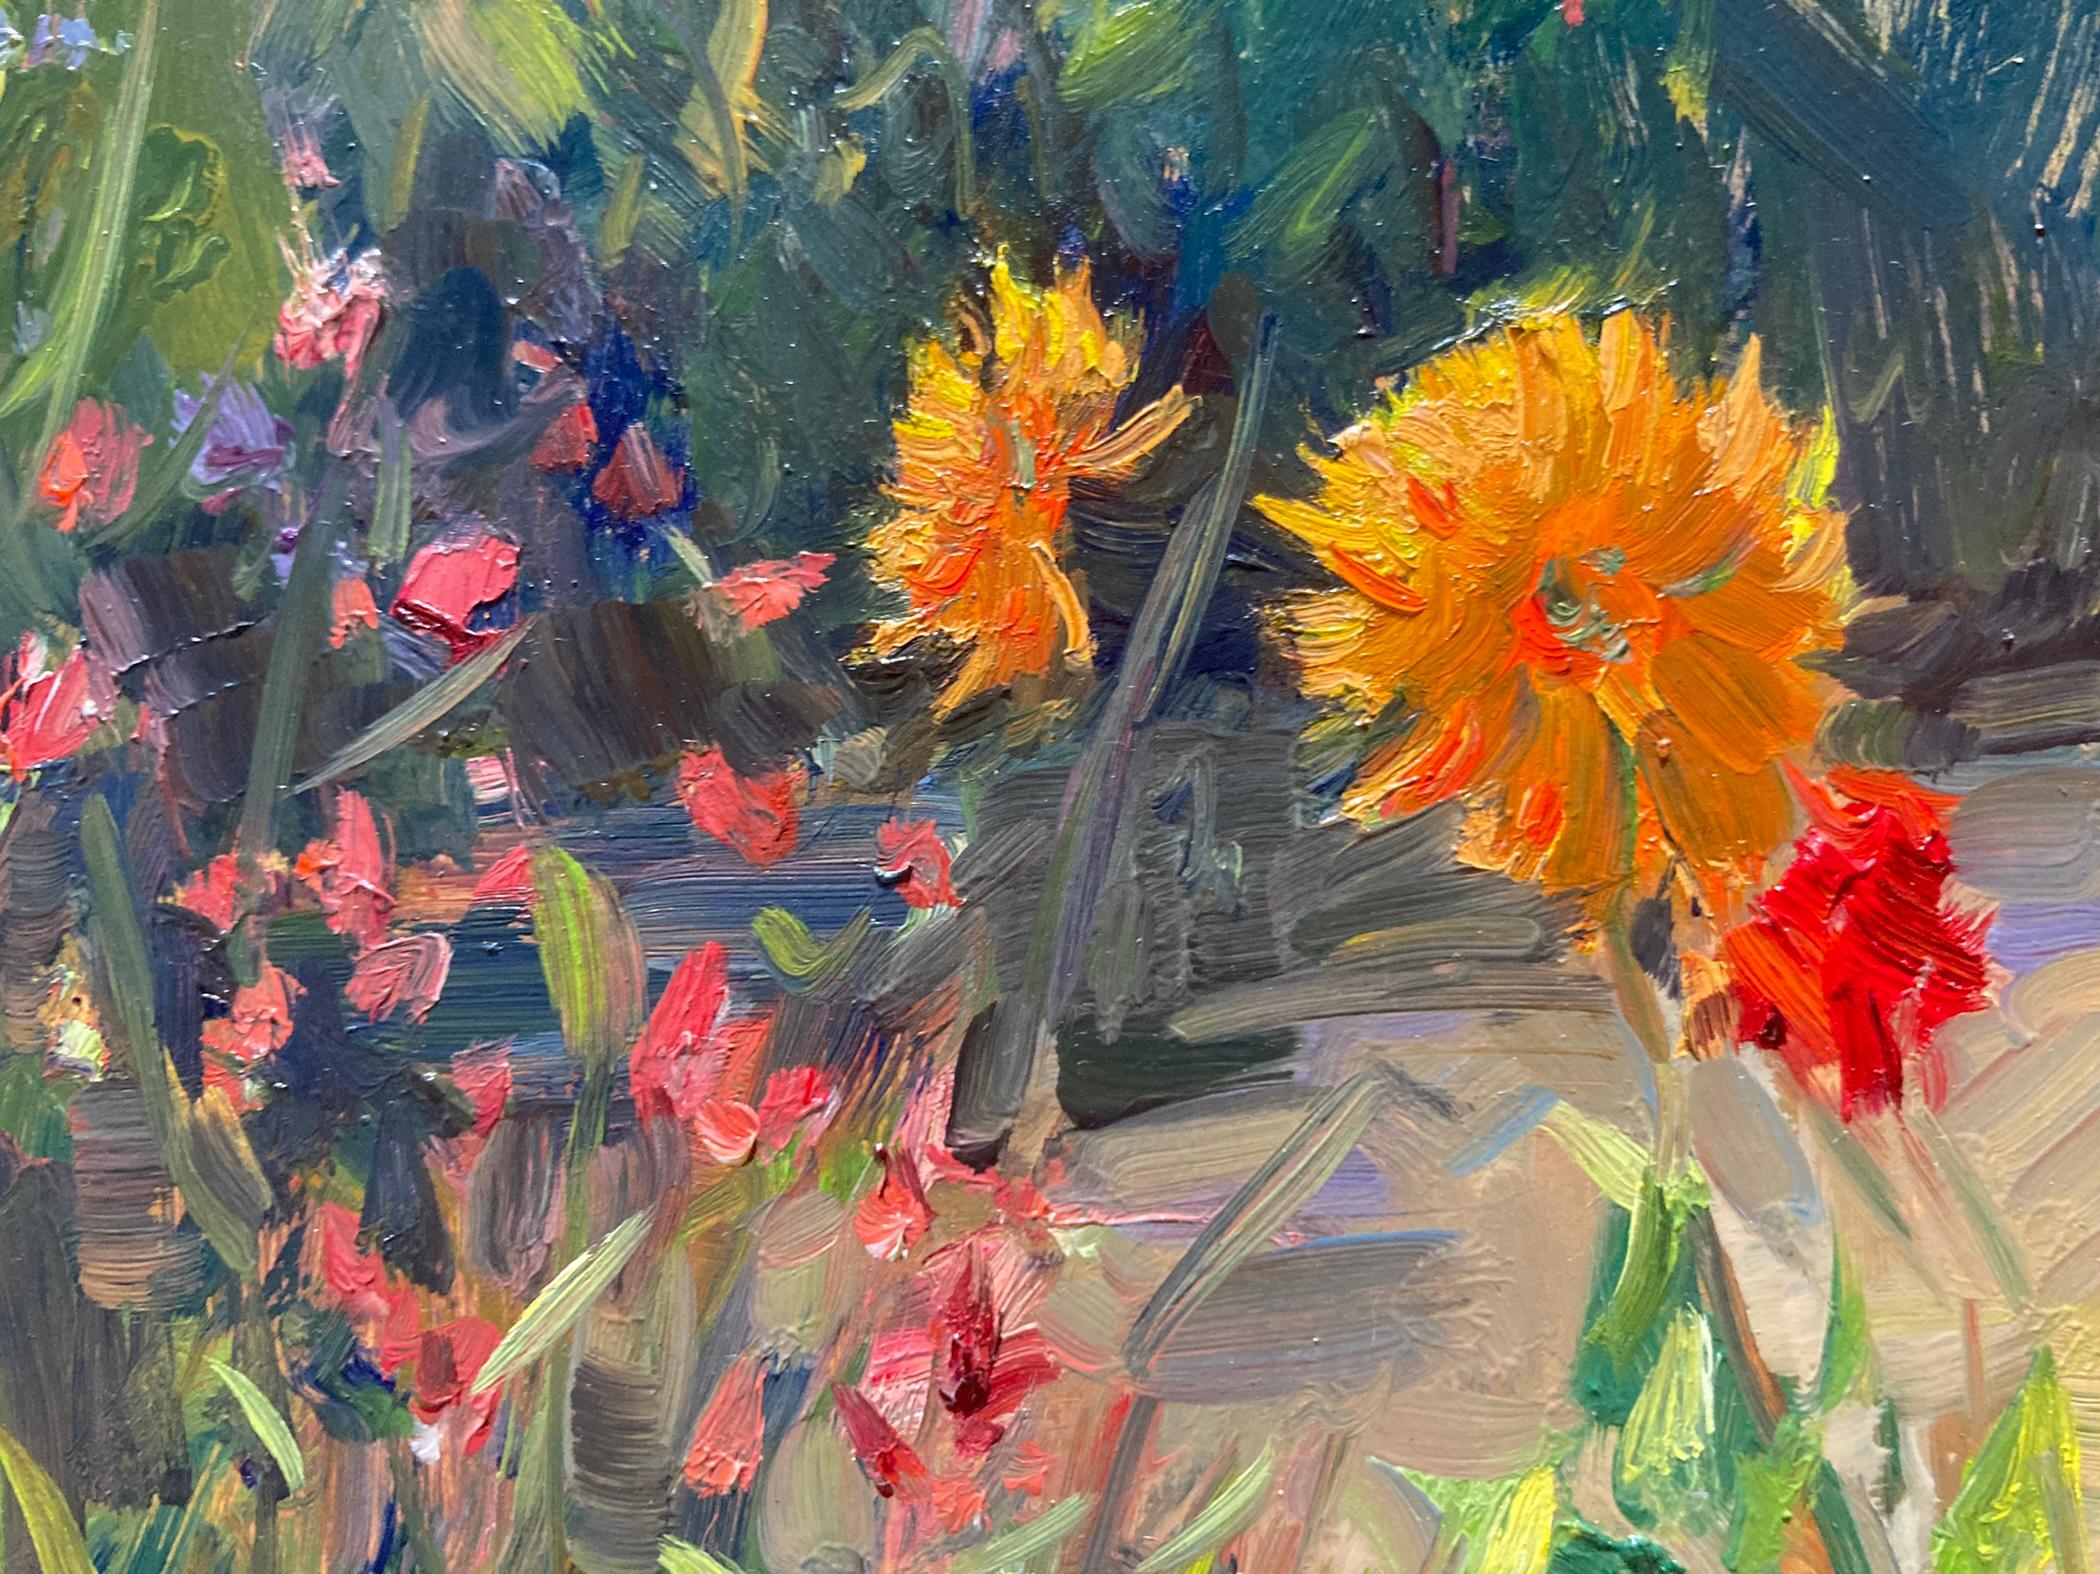 A plein-air painting of bright flowers growing in a garden. Orsolic Dalessio frames a very close-up composition to fully show the richness of the flowers in this impressionistic panel painting. 

Framed dimensions: 19.5 x 15.5 inches

Tina Orsolic